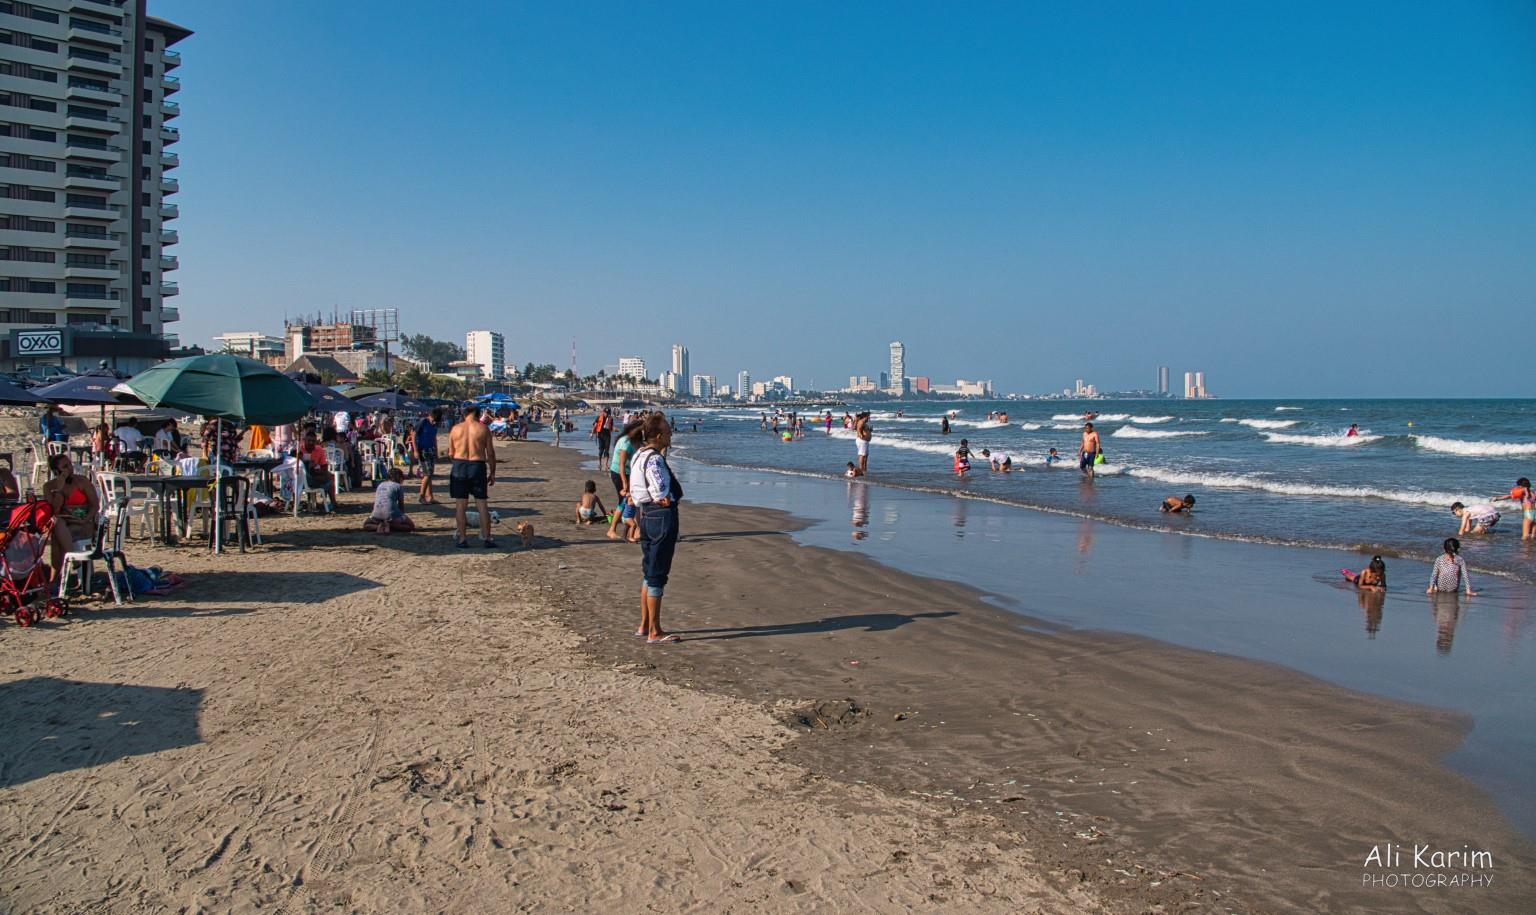 Veracruz, Mexico, December 2020, The beach area of the city, with the city’s newer skyscrapers in the back